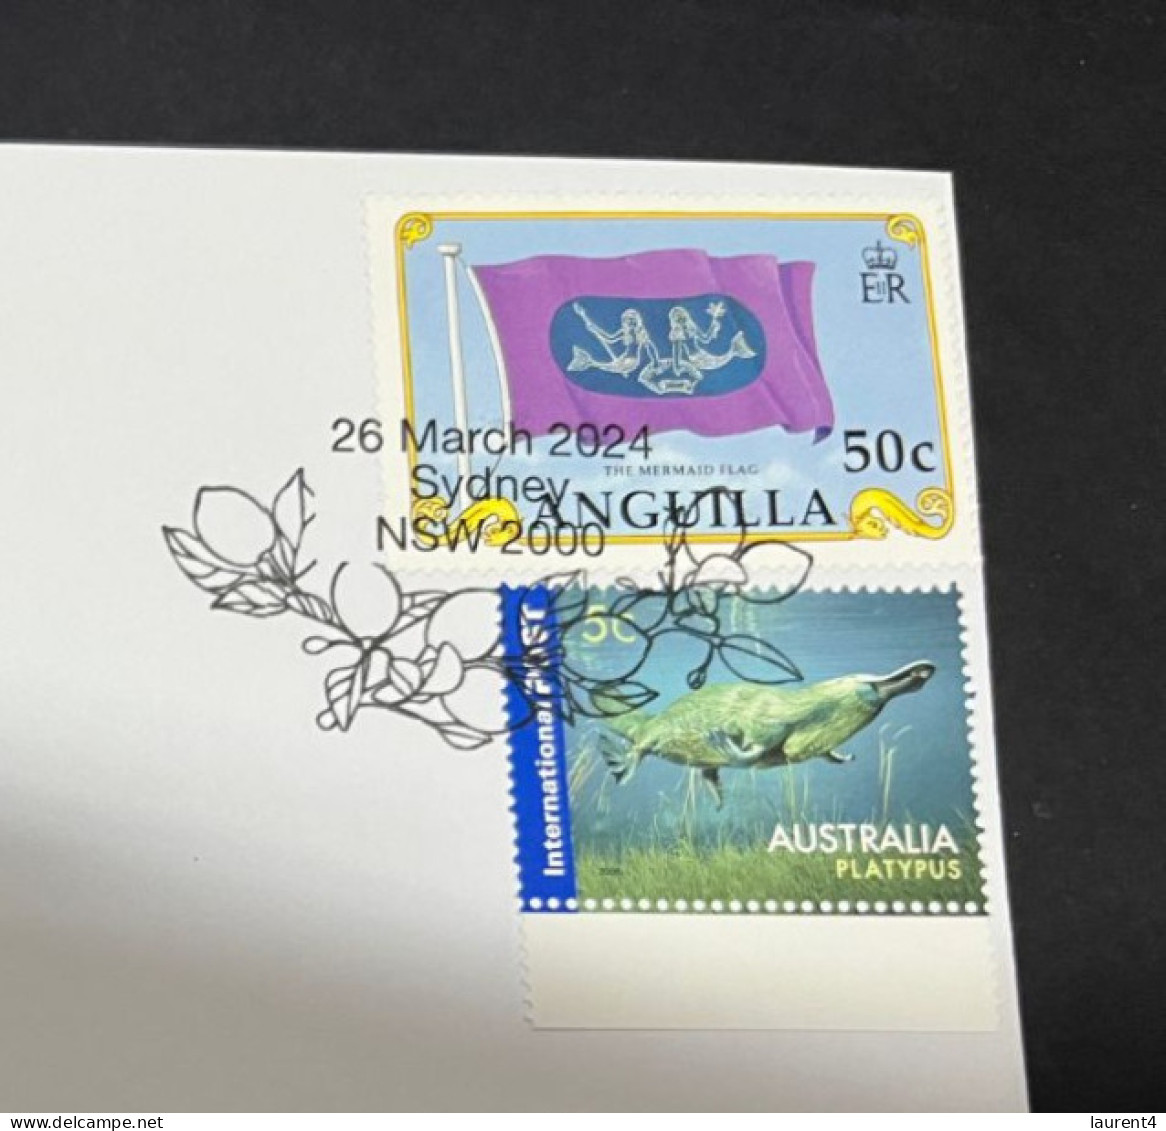 26-3-2024 (4 Y 8) COVID-19 4th Anniversary - Anguilla - 26 March 2024 (with Anguilla Flag Stamp) - Disease